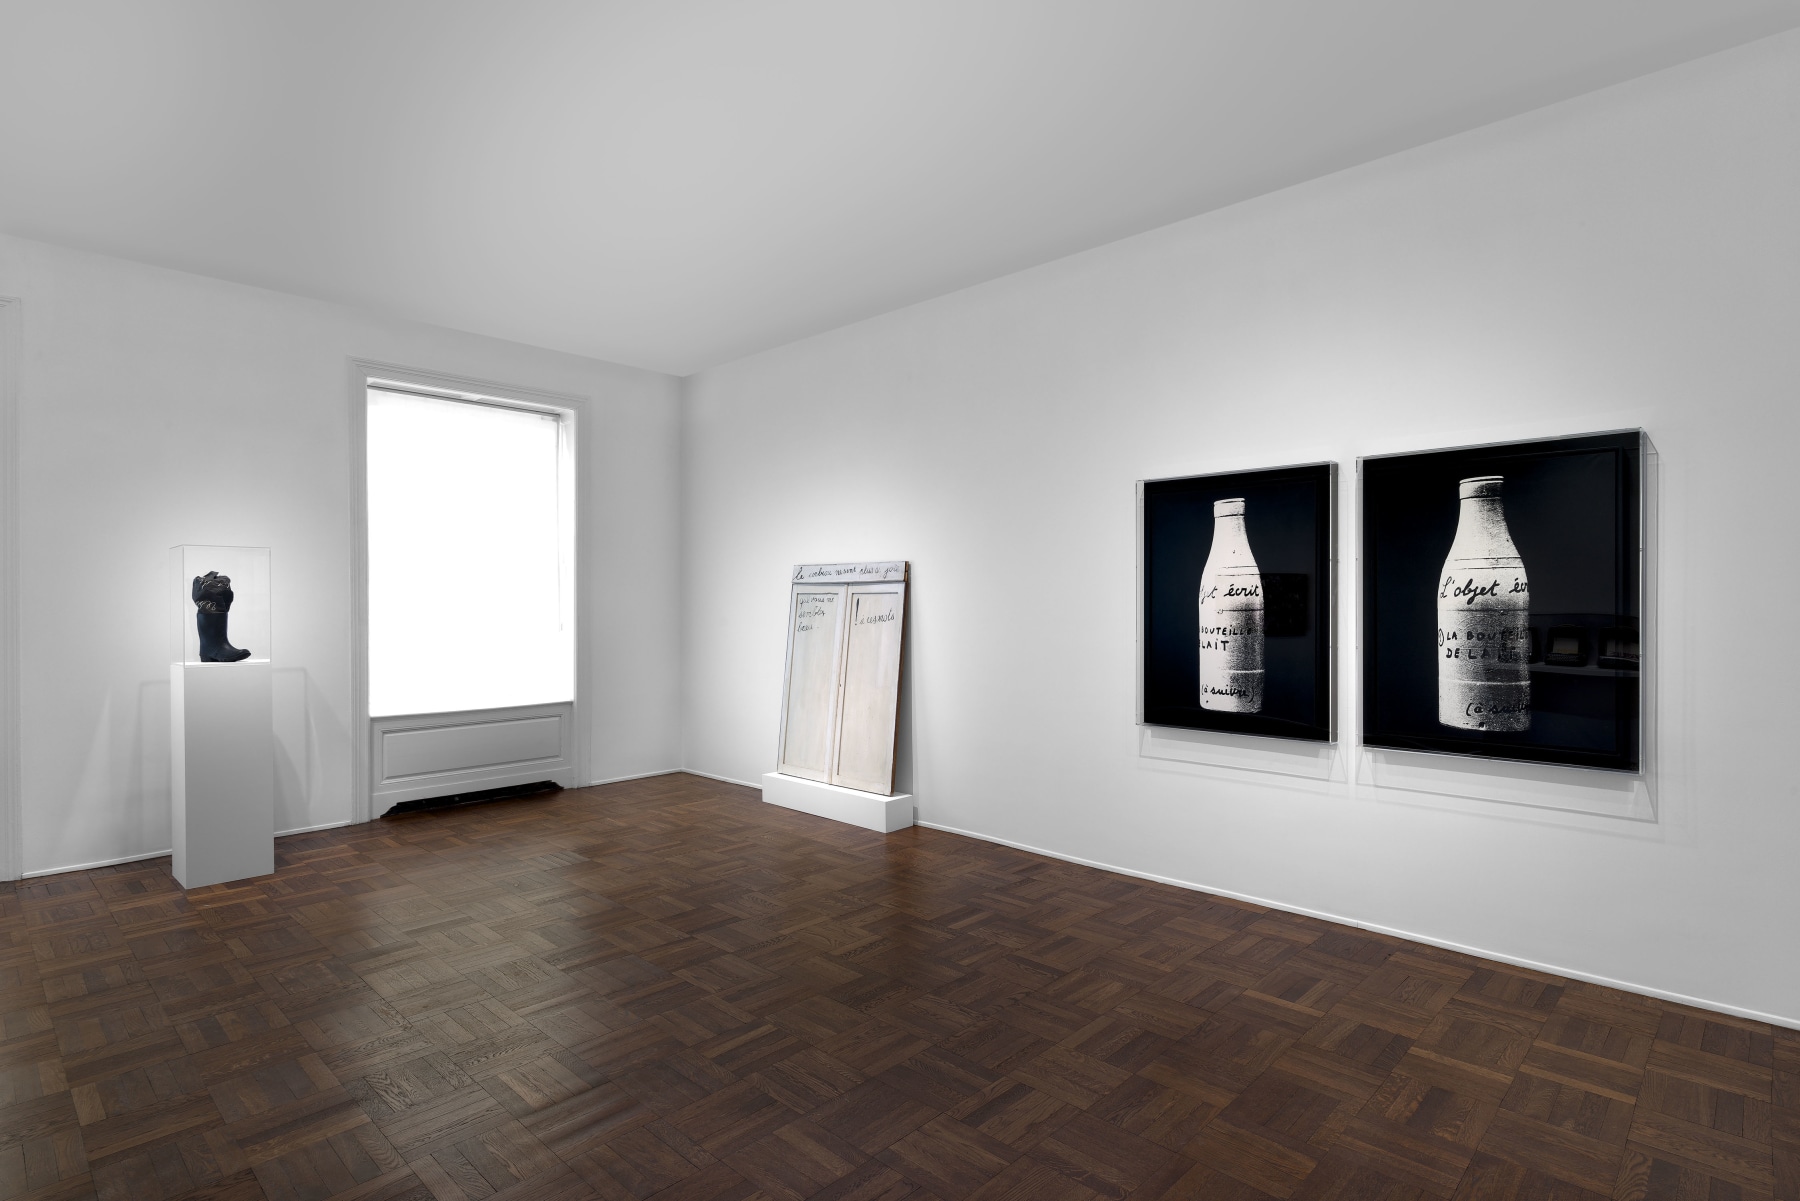 MARCEL BROODTHAERS &Eacute;criture 28 January through 26 March 2016 UPPER EAST SIDE, NEW YORK, Installation View 7